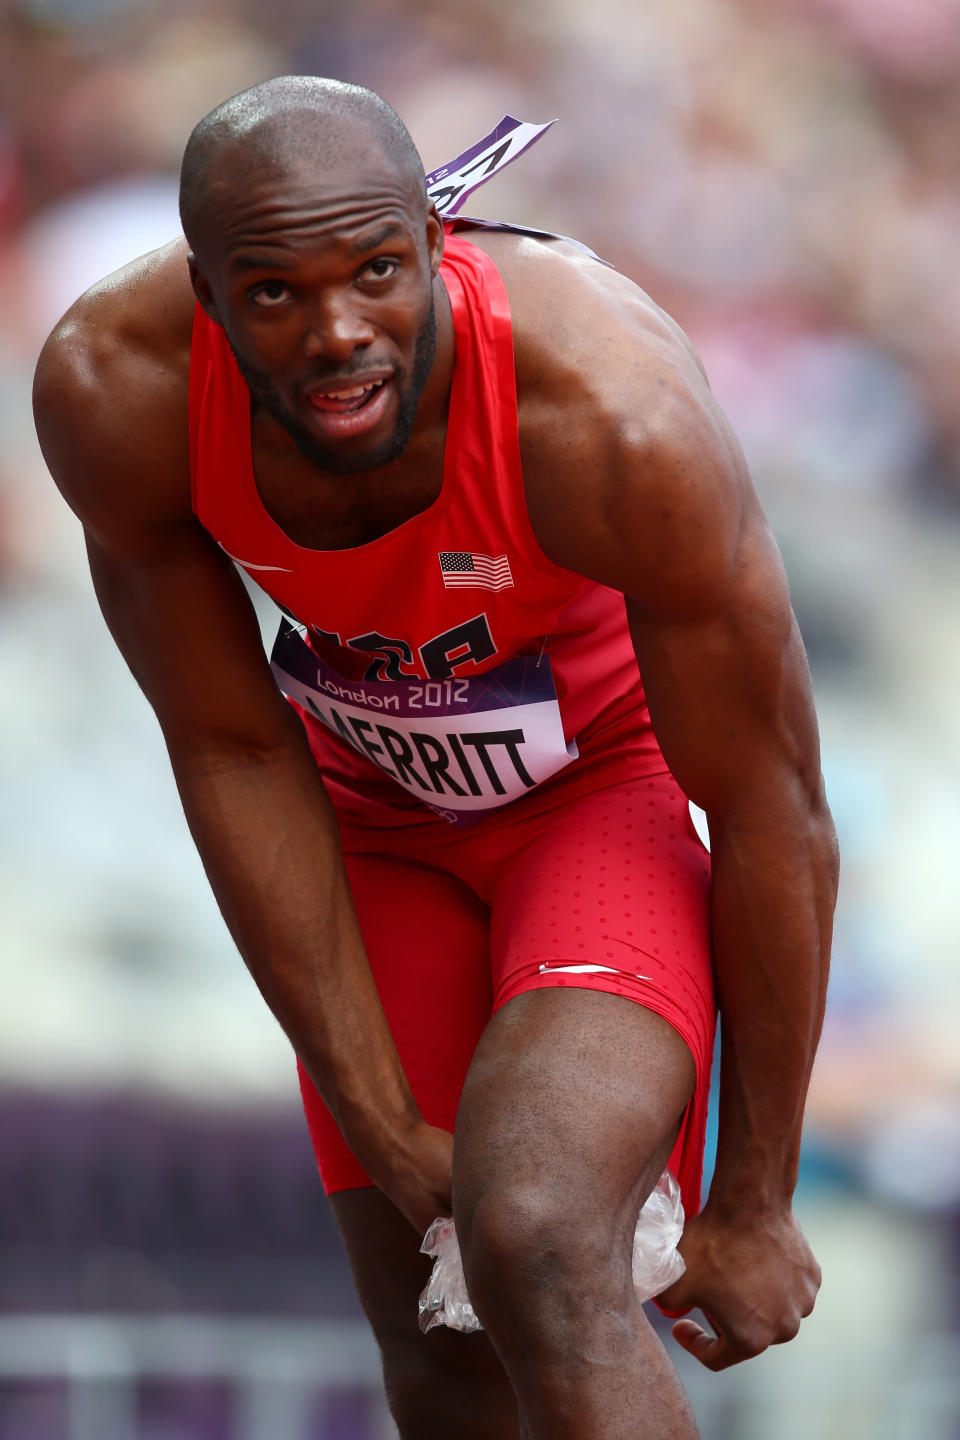 Lashawn Merritt of the United States pulls out with a hamstring injury in the Men's 400m Round 1 Heats on Day 8 of the London 2012 Olympic Games at Olympic Stadium on August 4, 2012 in London, England. (Photo by Michael Steele/Getty Images)